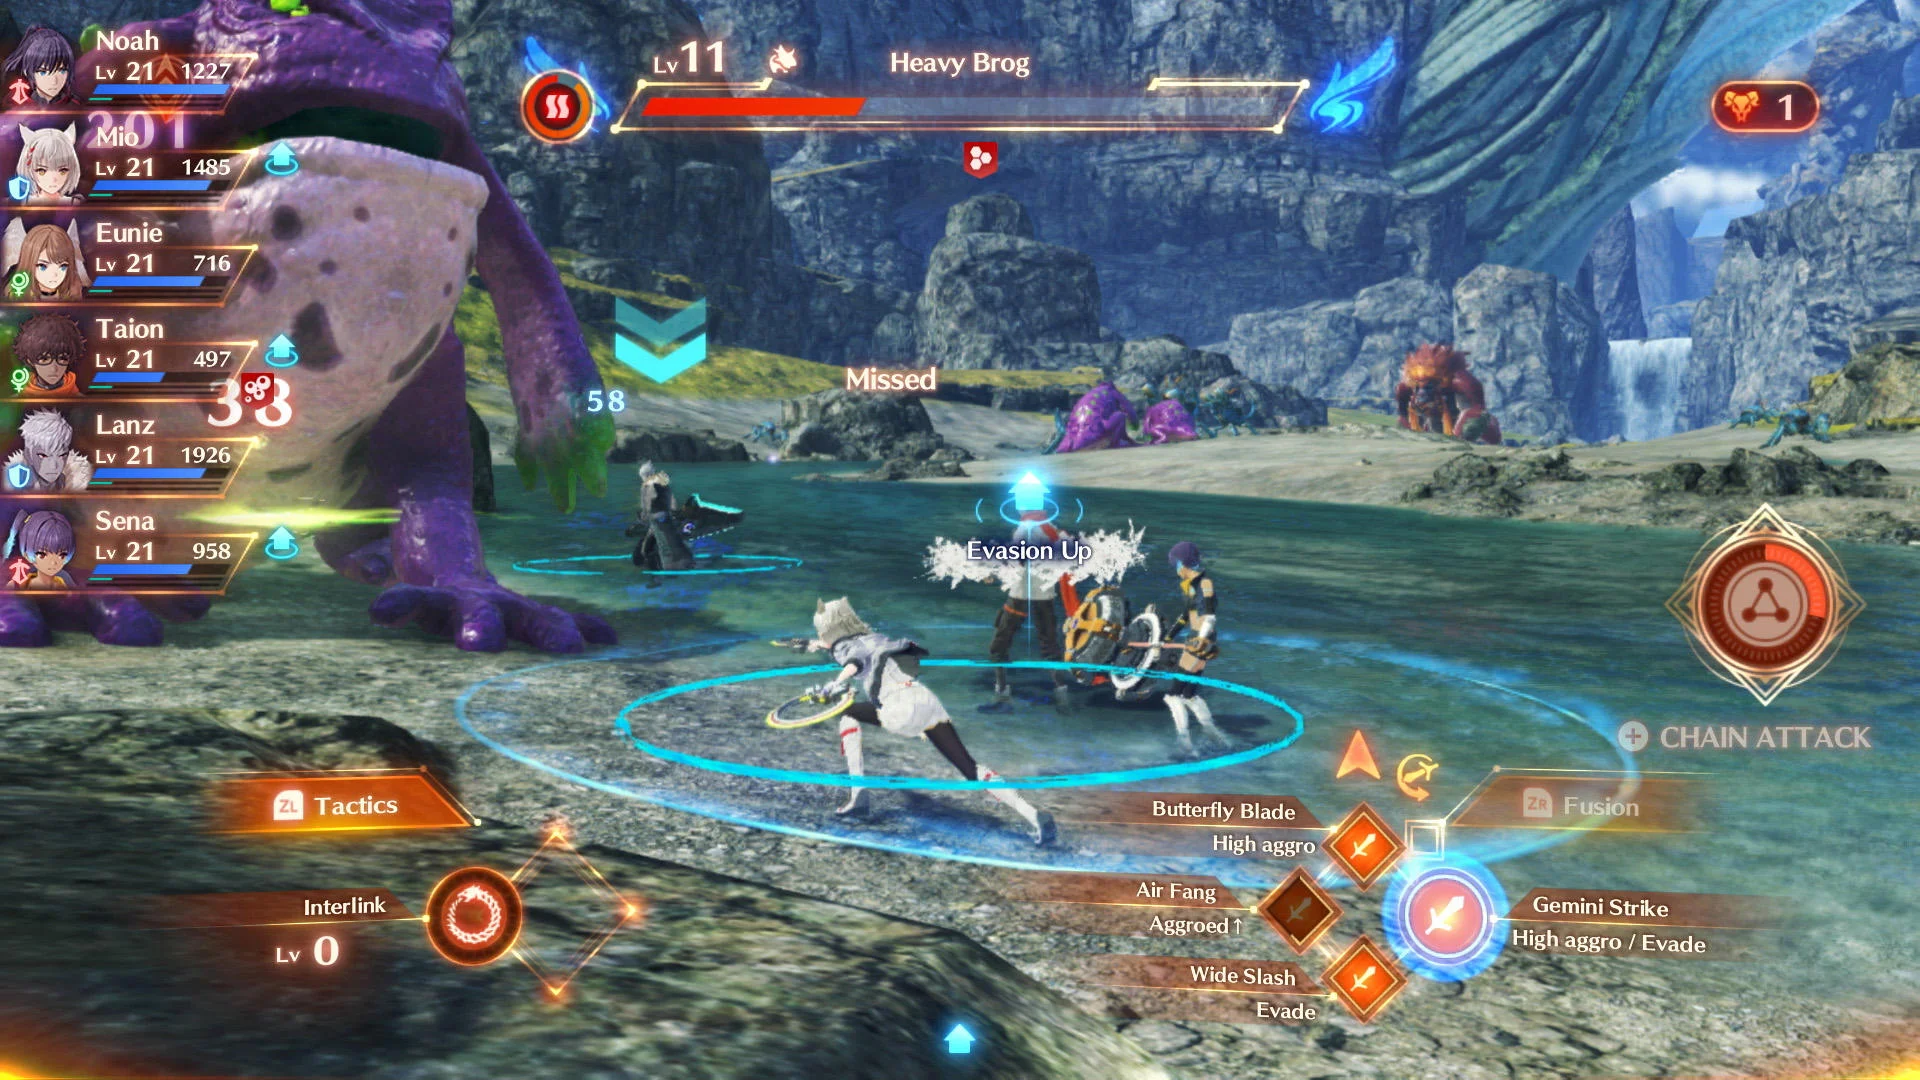 Xenoblade Chronicles 3 Review – The Beginning and the End